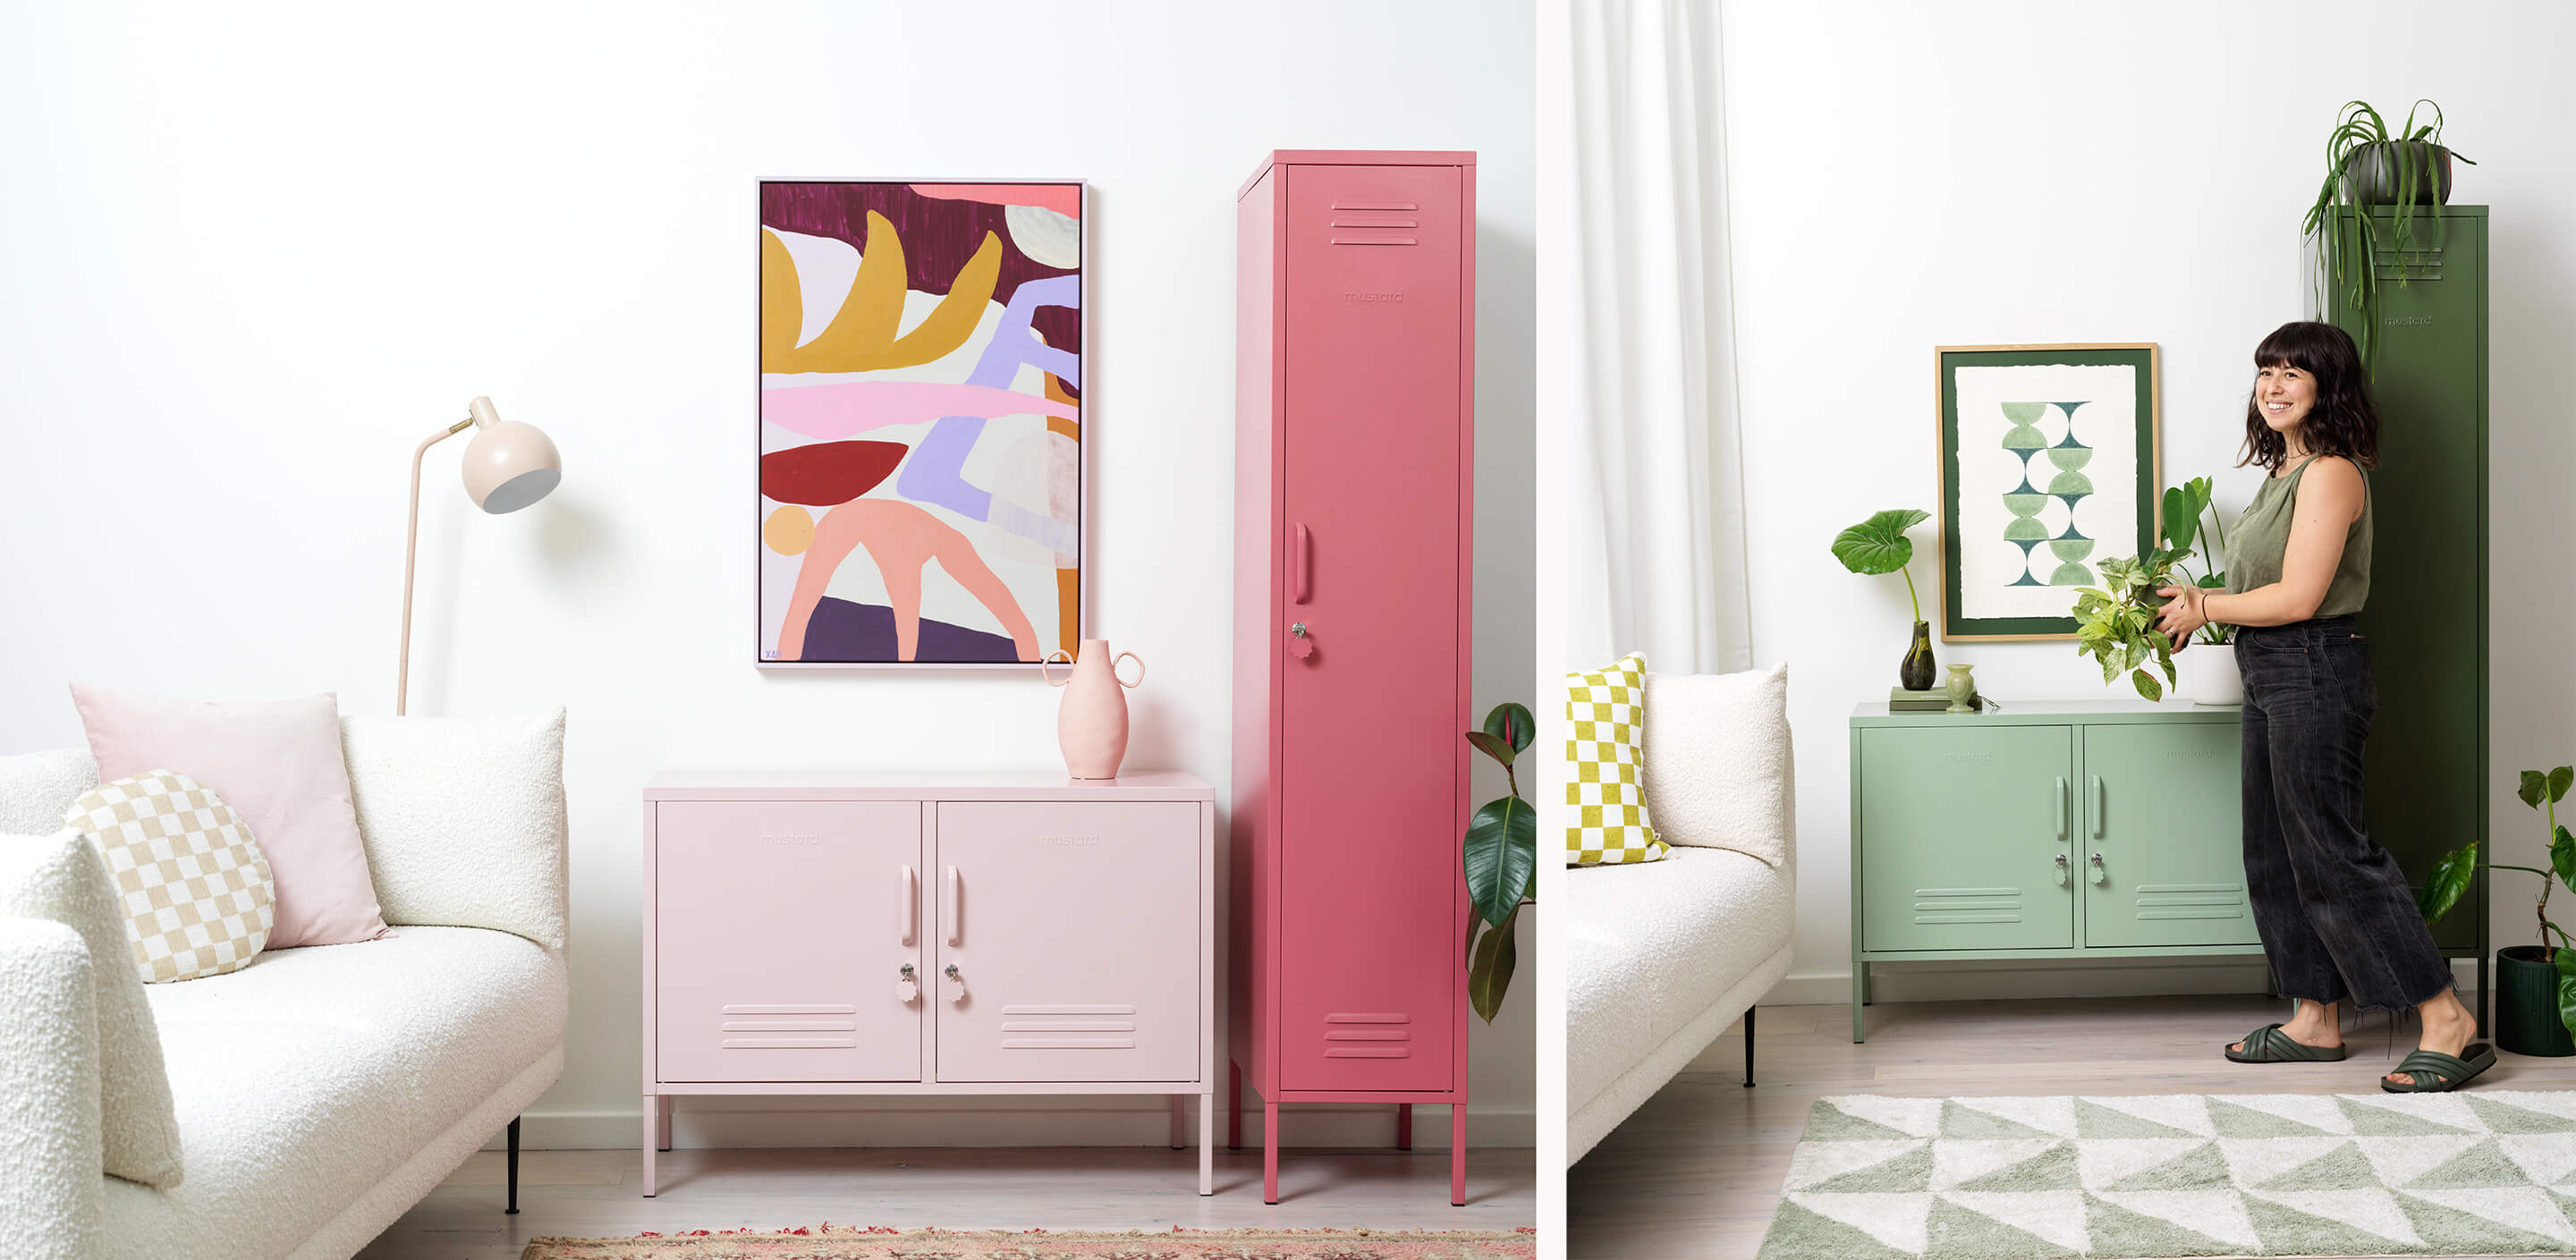 Mustard Made is all about offering you practical, yet stylish, storage solutions. Their range of lockers are super versatile, perfect for a bedroom, home office, kids room, or living spaces, they also come in a wide selection of fun and bright colours.